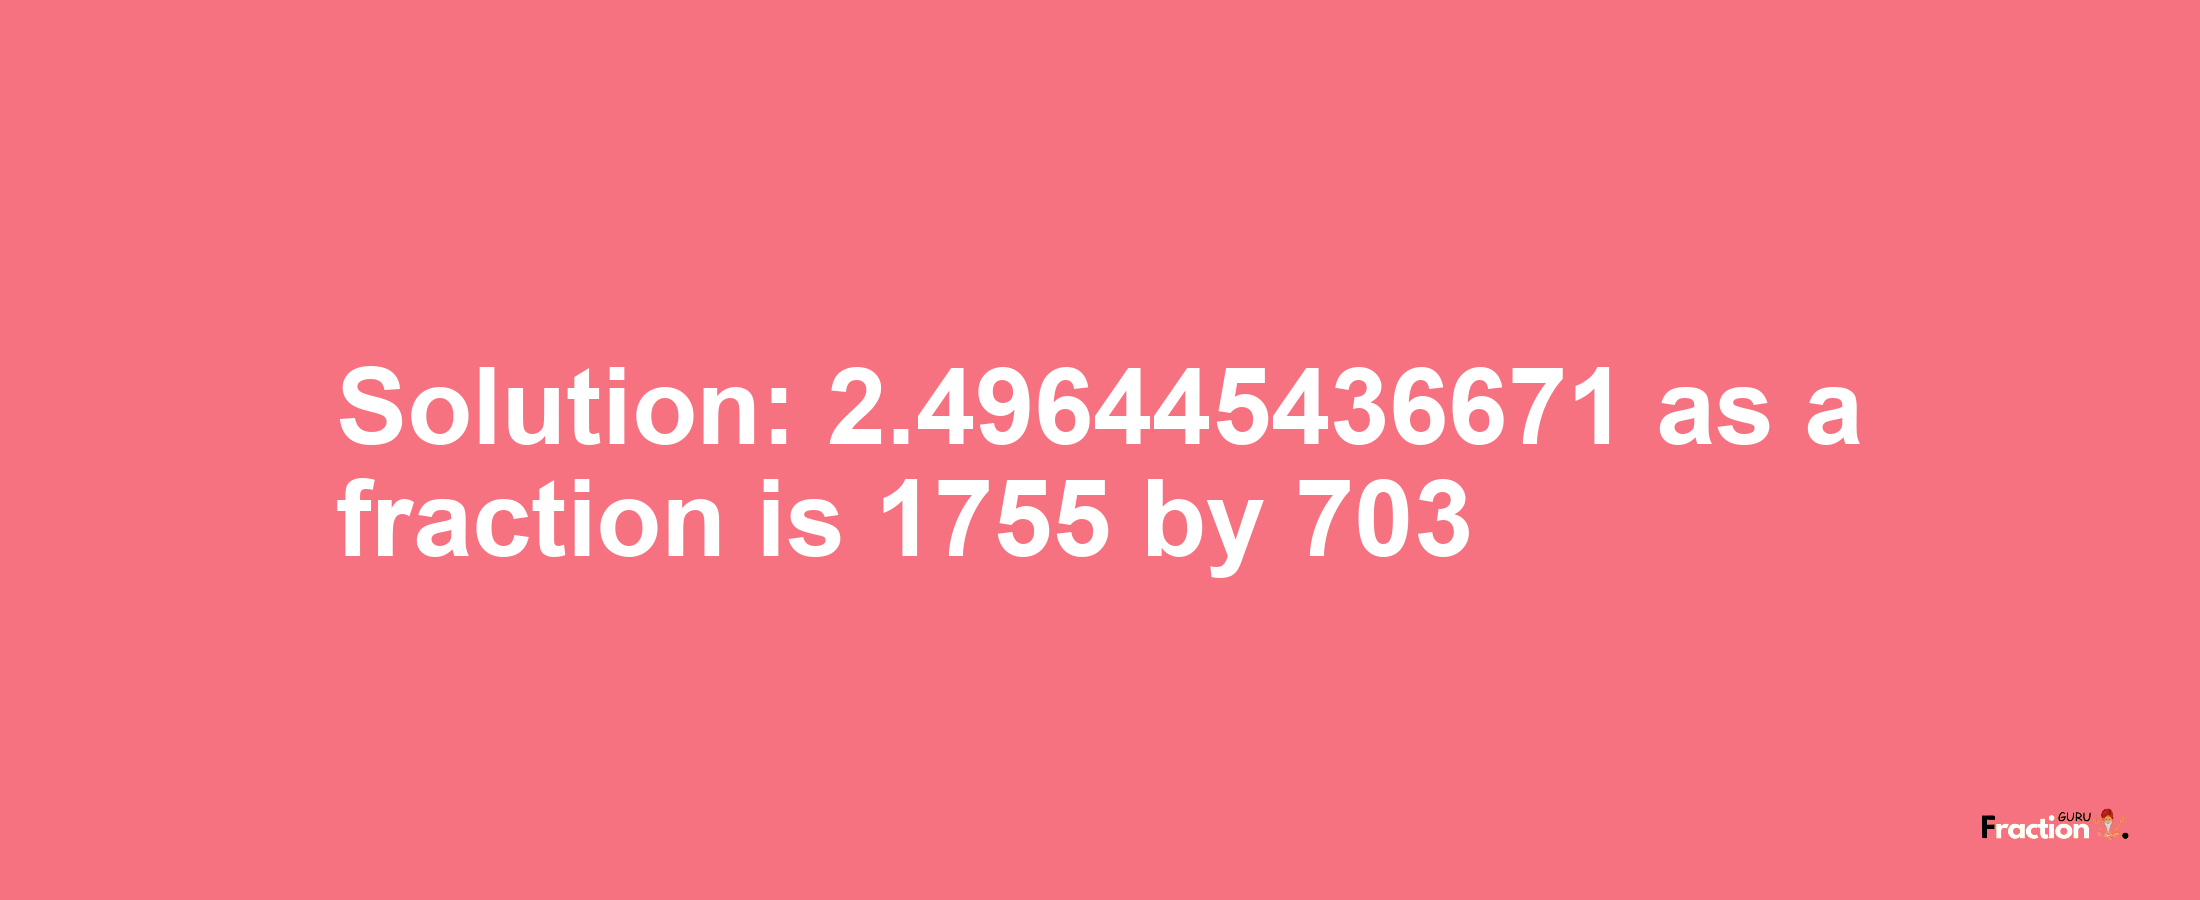 Solution:2.496445436671 as a fraction is 1755/703